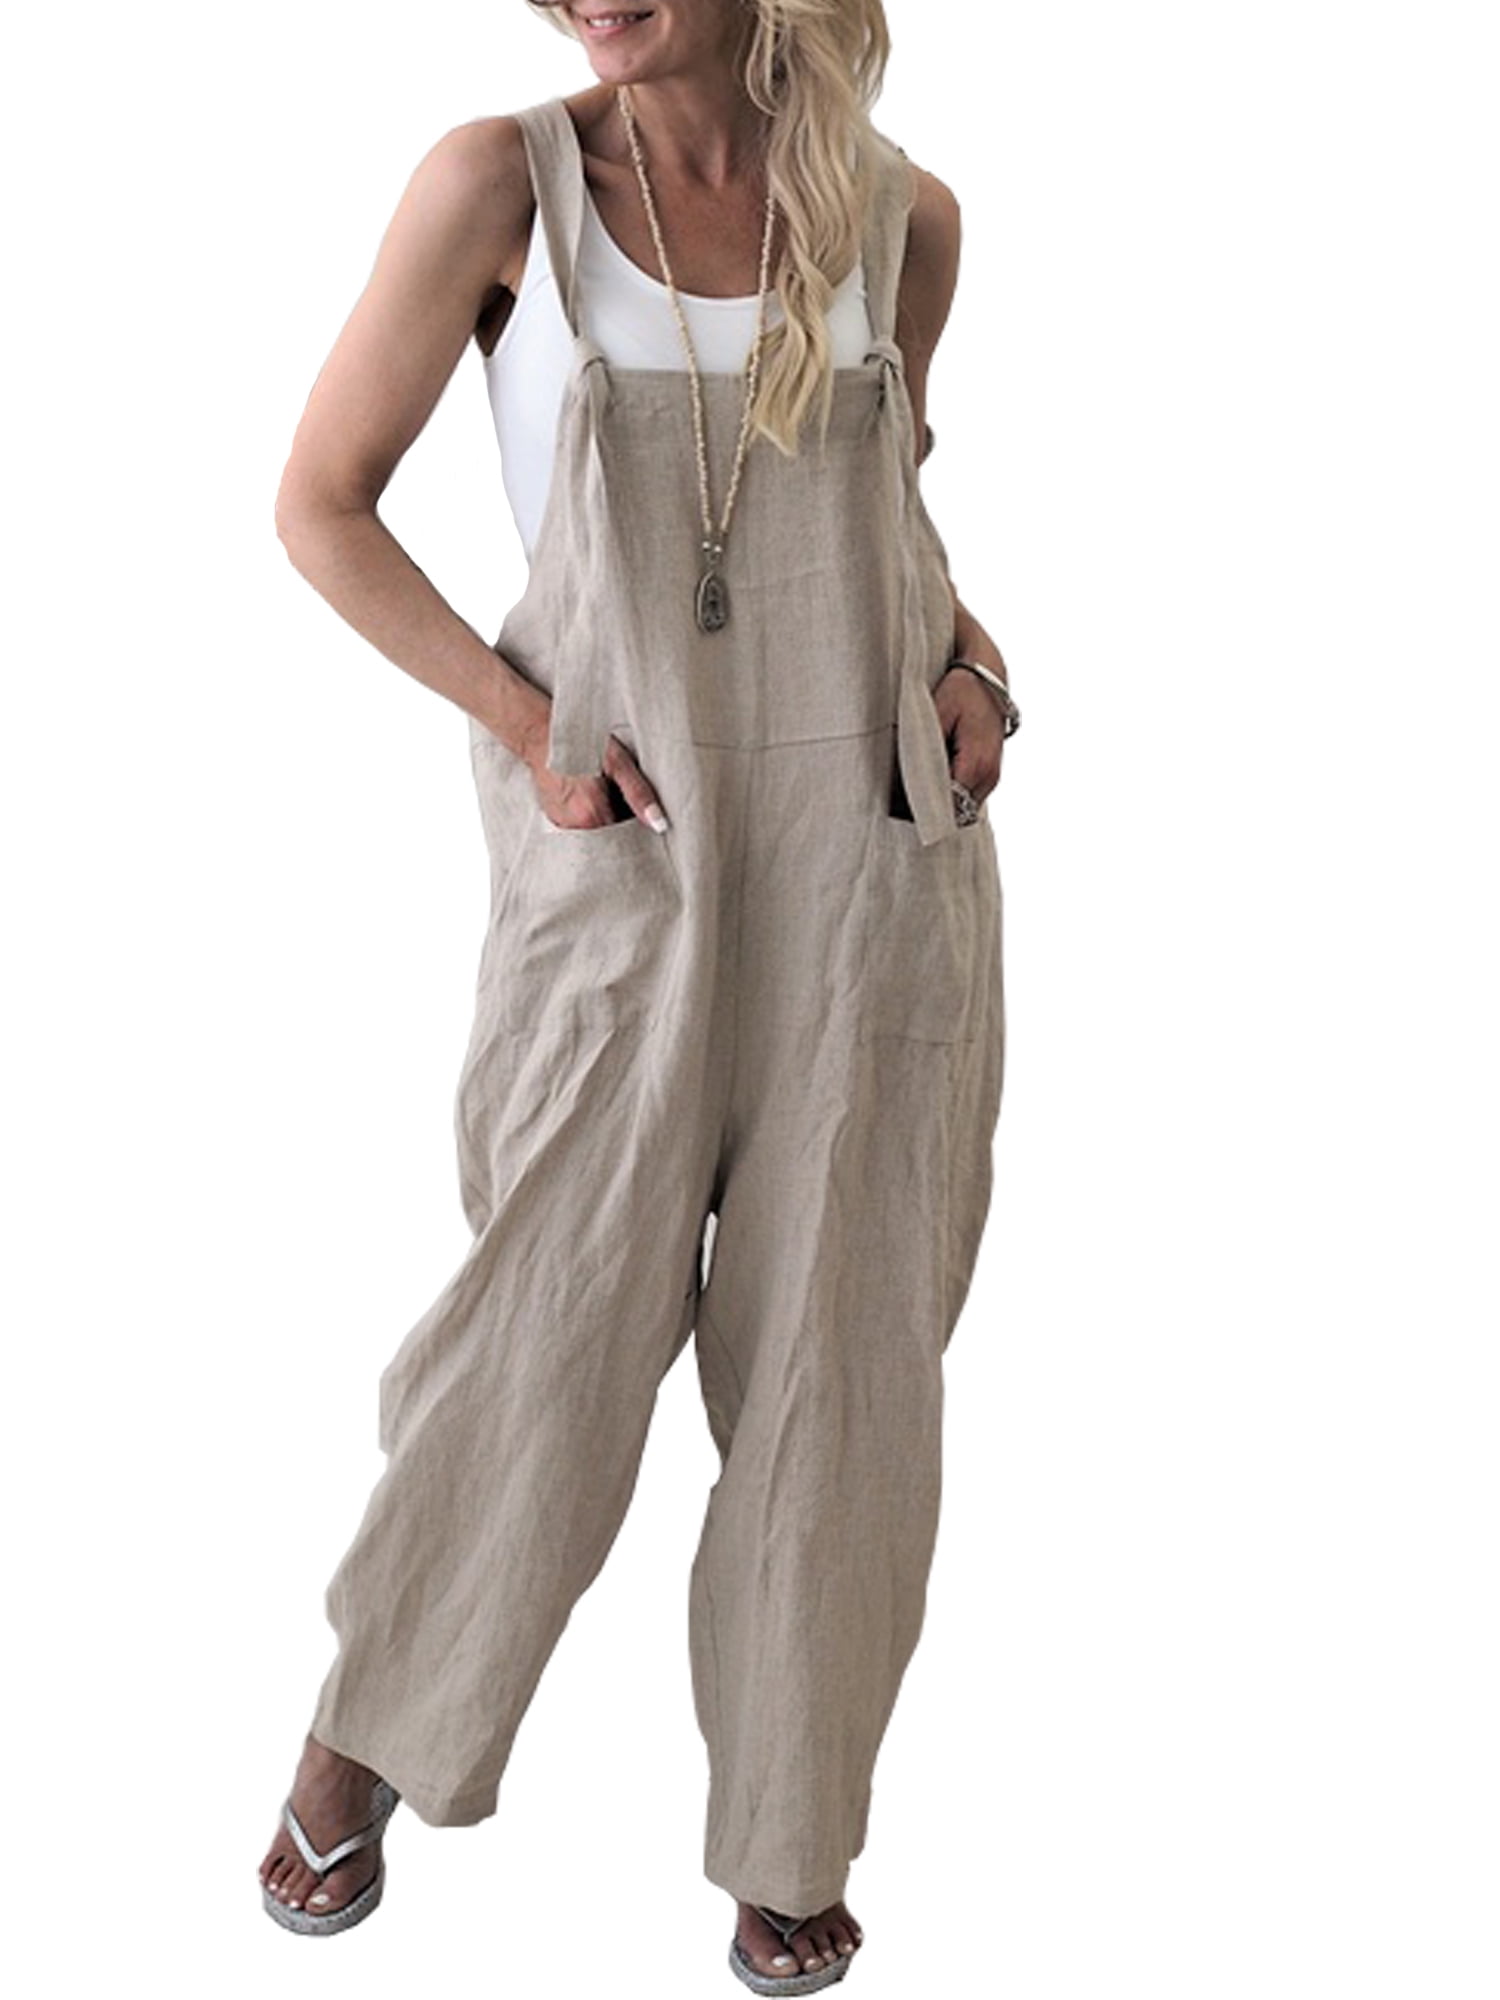 MIS1950s People Loose Fit Jumpsuits Women Cotton Linen Baggy Overalls Jumpsuits Vintage Sleeveless Wide Leg Pants Rompers 